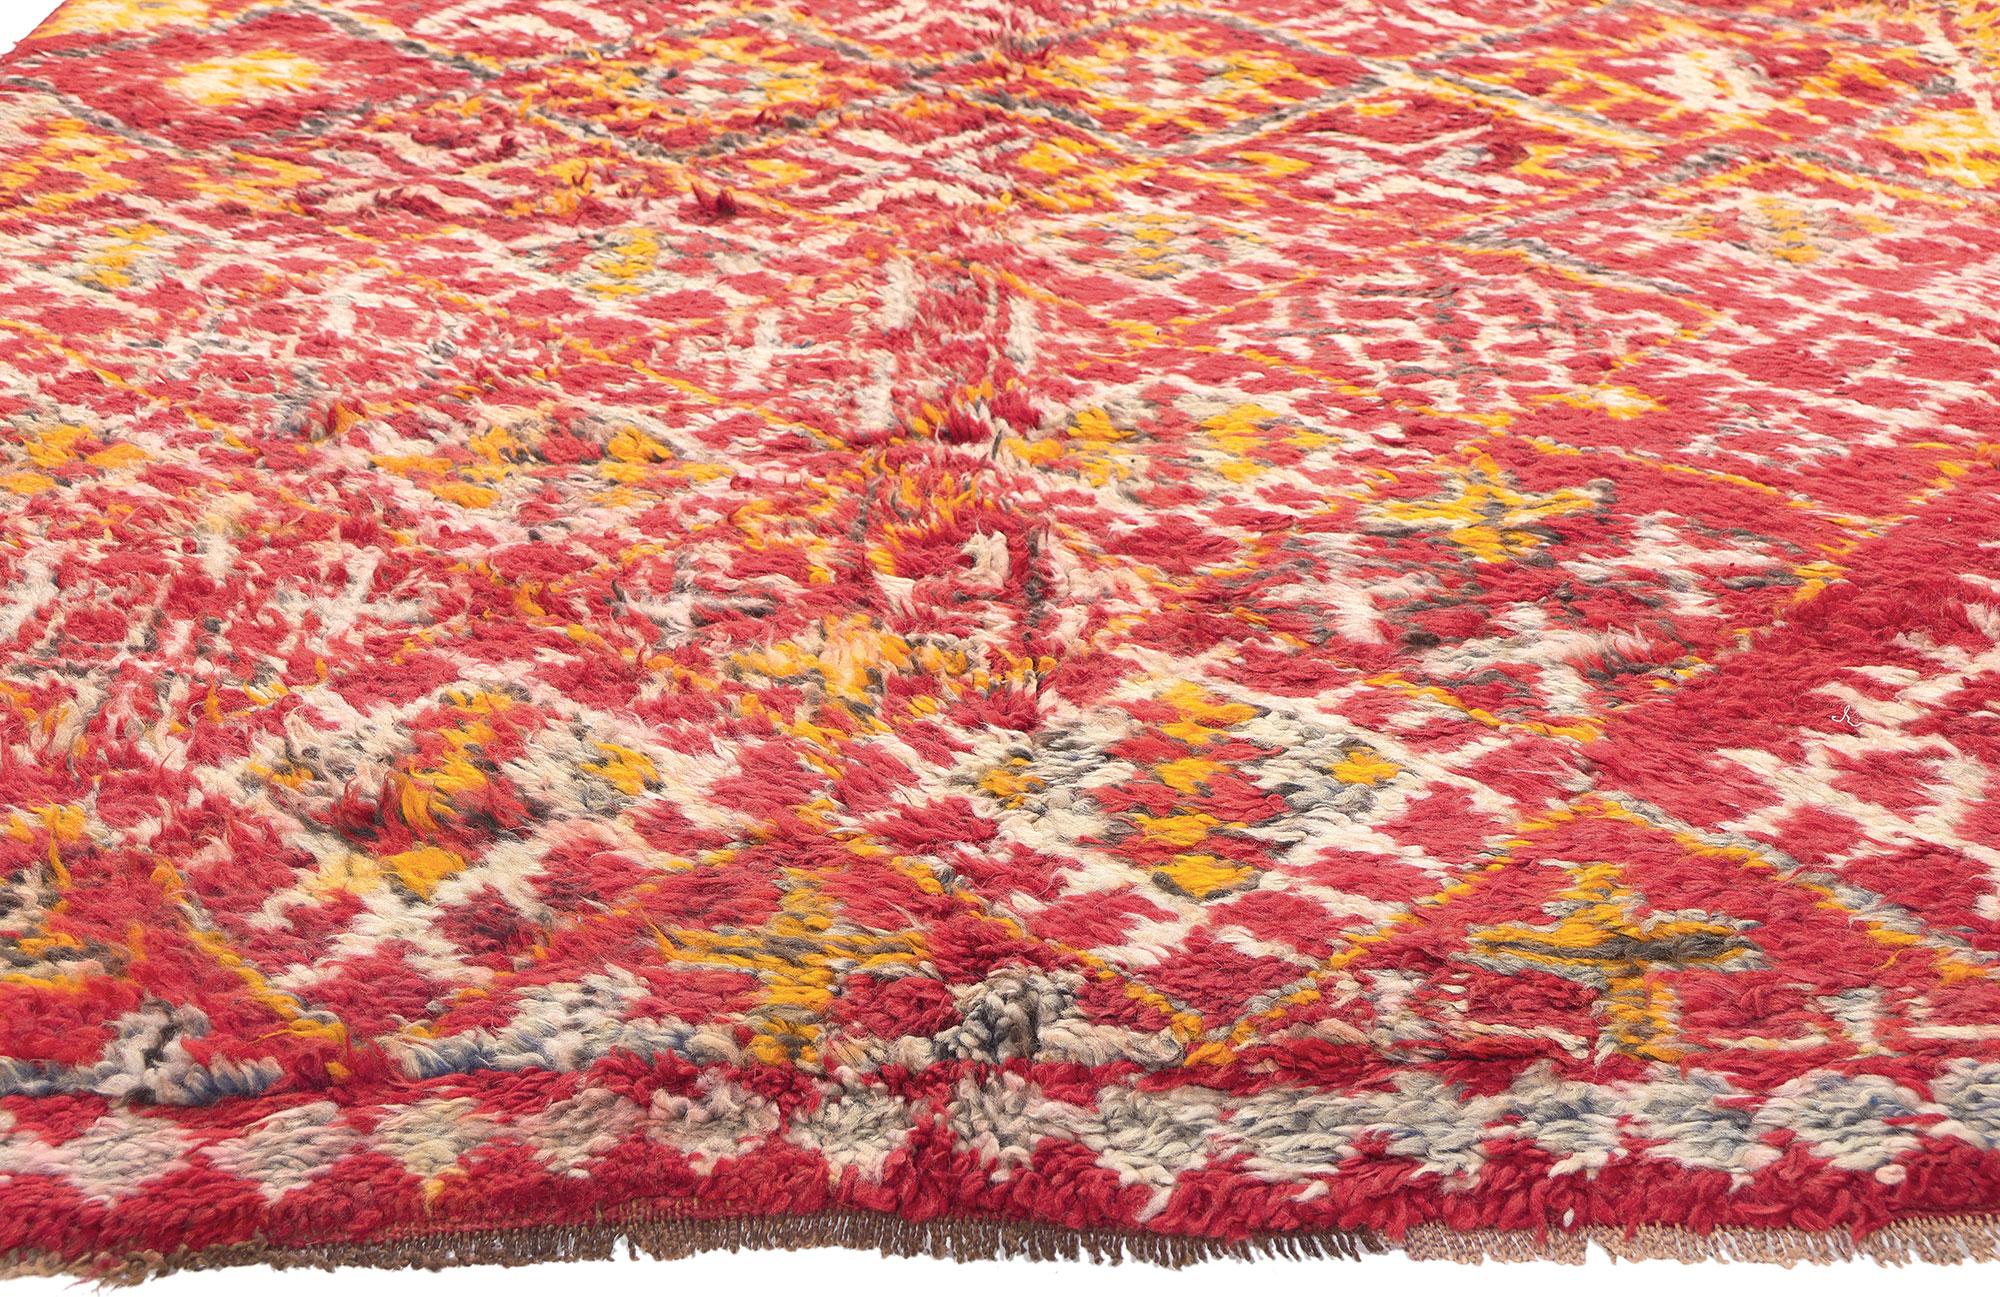 Hand-Knotted Vintage Beni MGuild Moroccan Rug, Midcentury Modern Meets Spicy Boho Chic For Sale